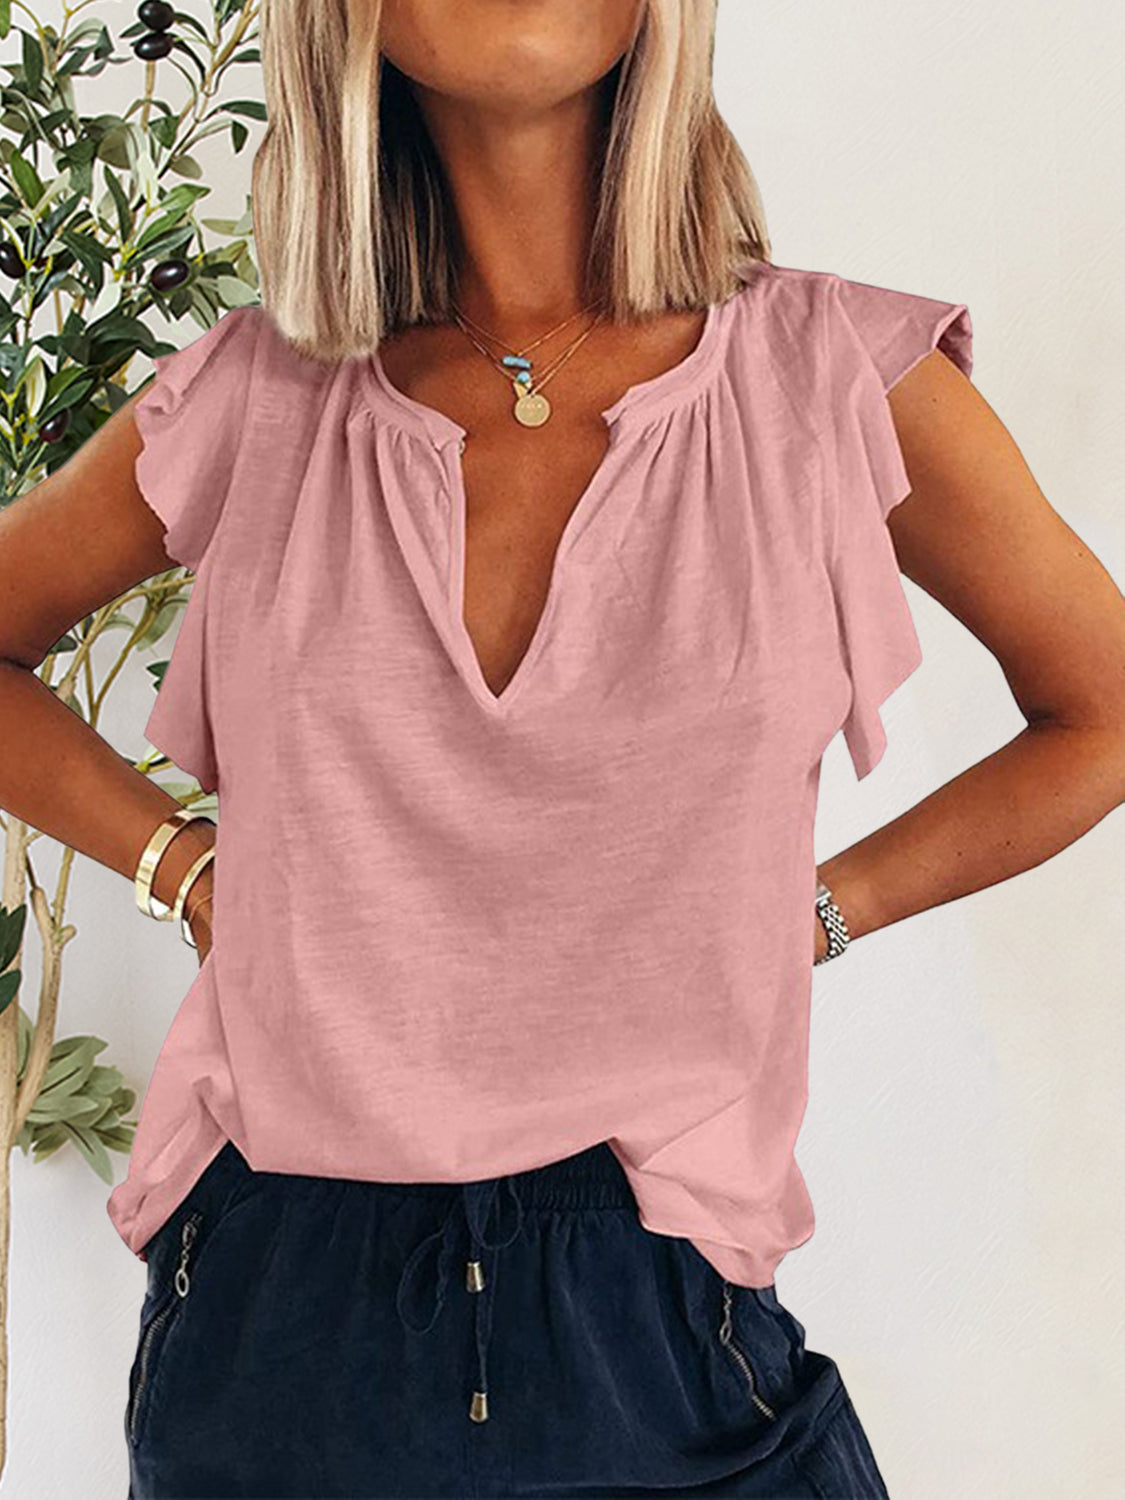 Chic Ruffled Notched Cap Sleeve T-Shirt in white, pink, sage & blue. Perfect blend of comfort & style for every occasion. Shop now!